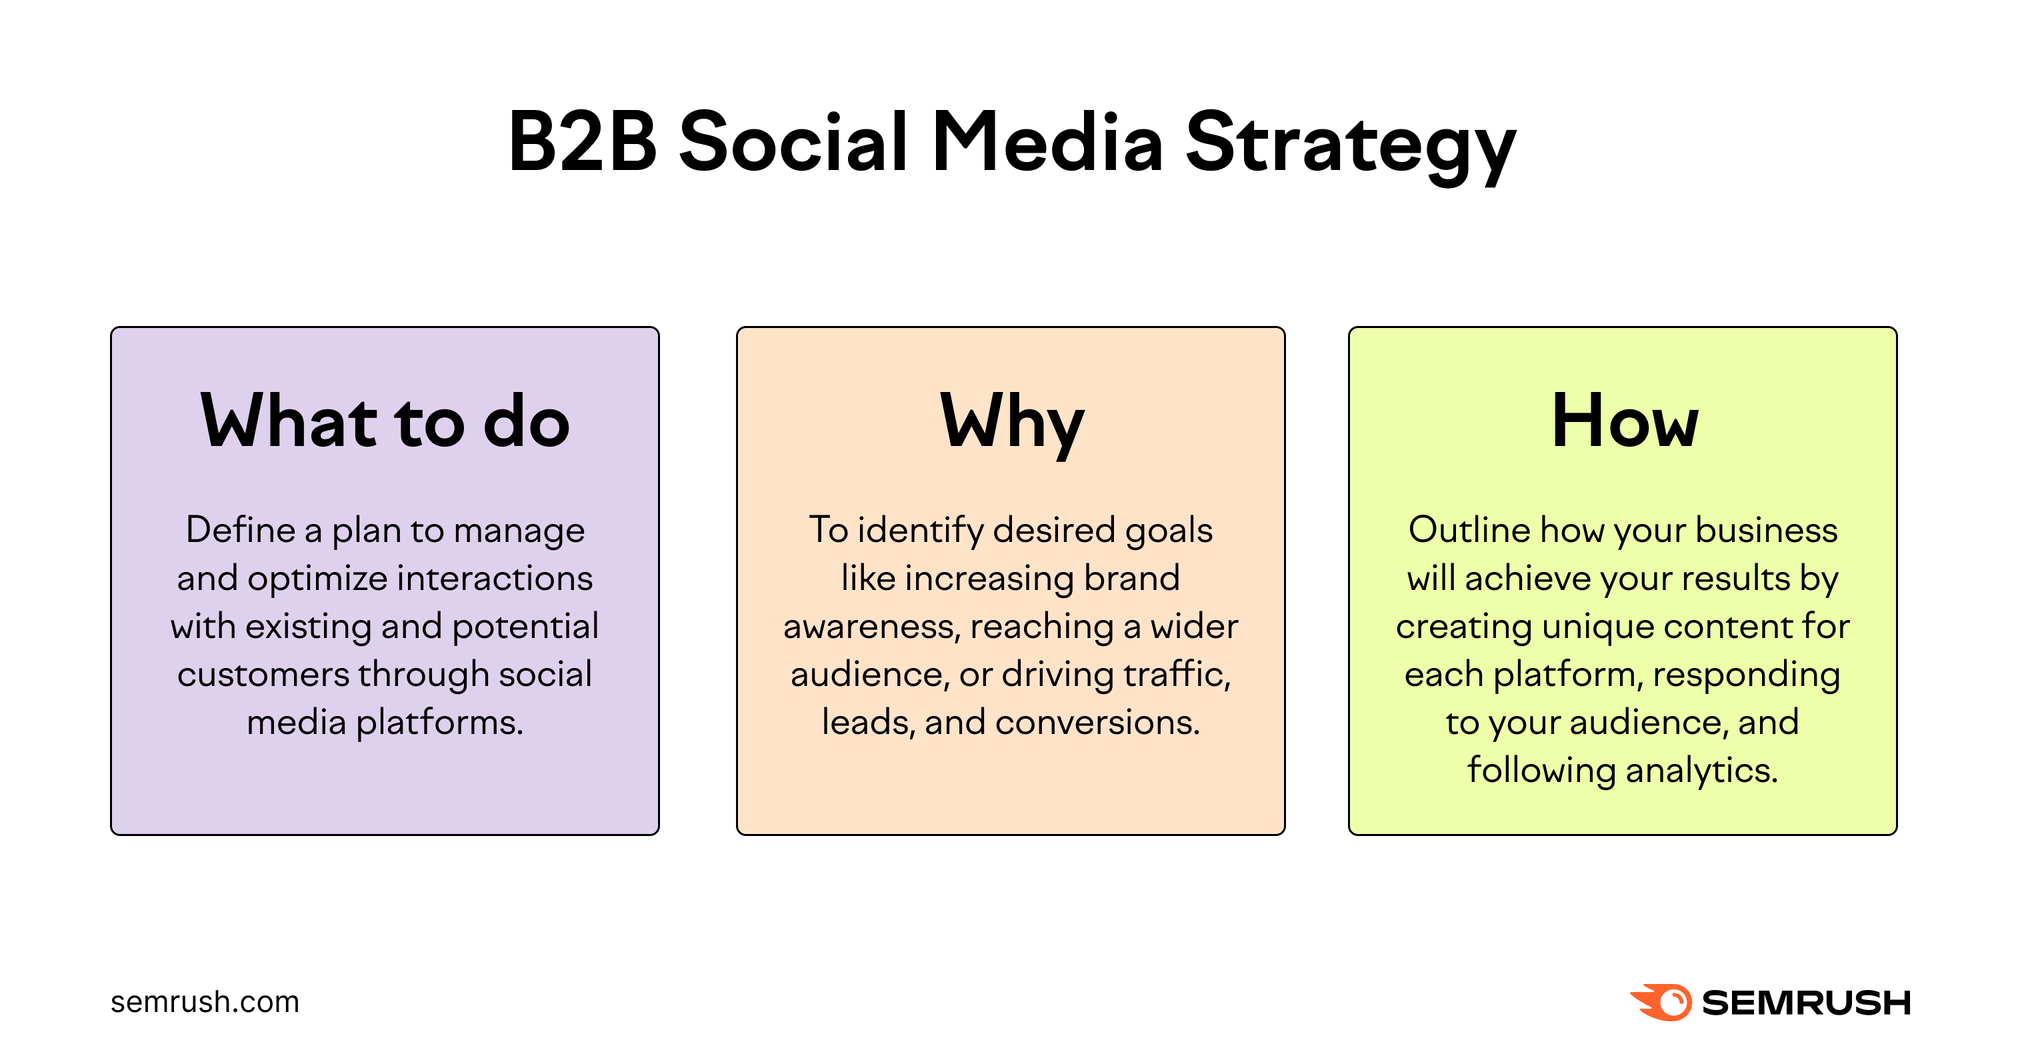 Image explaining the what, why, and how of social media marketing